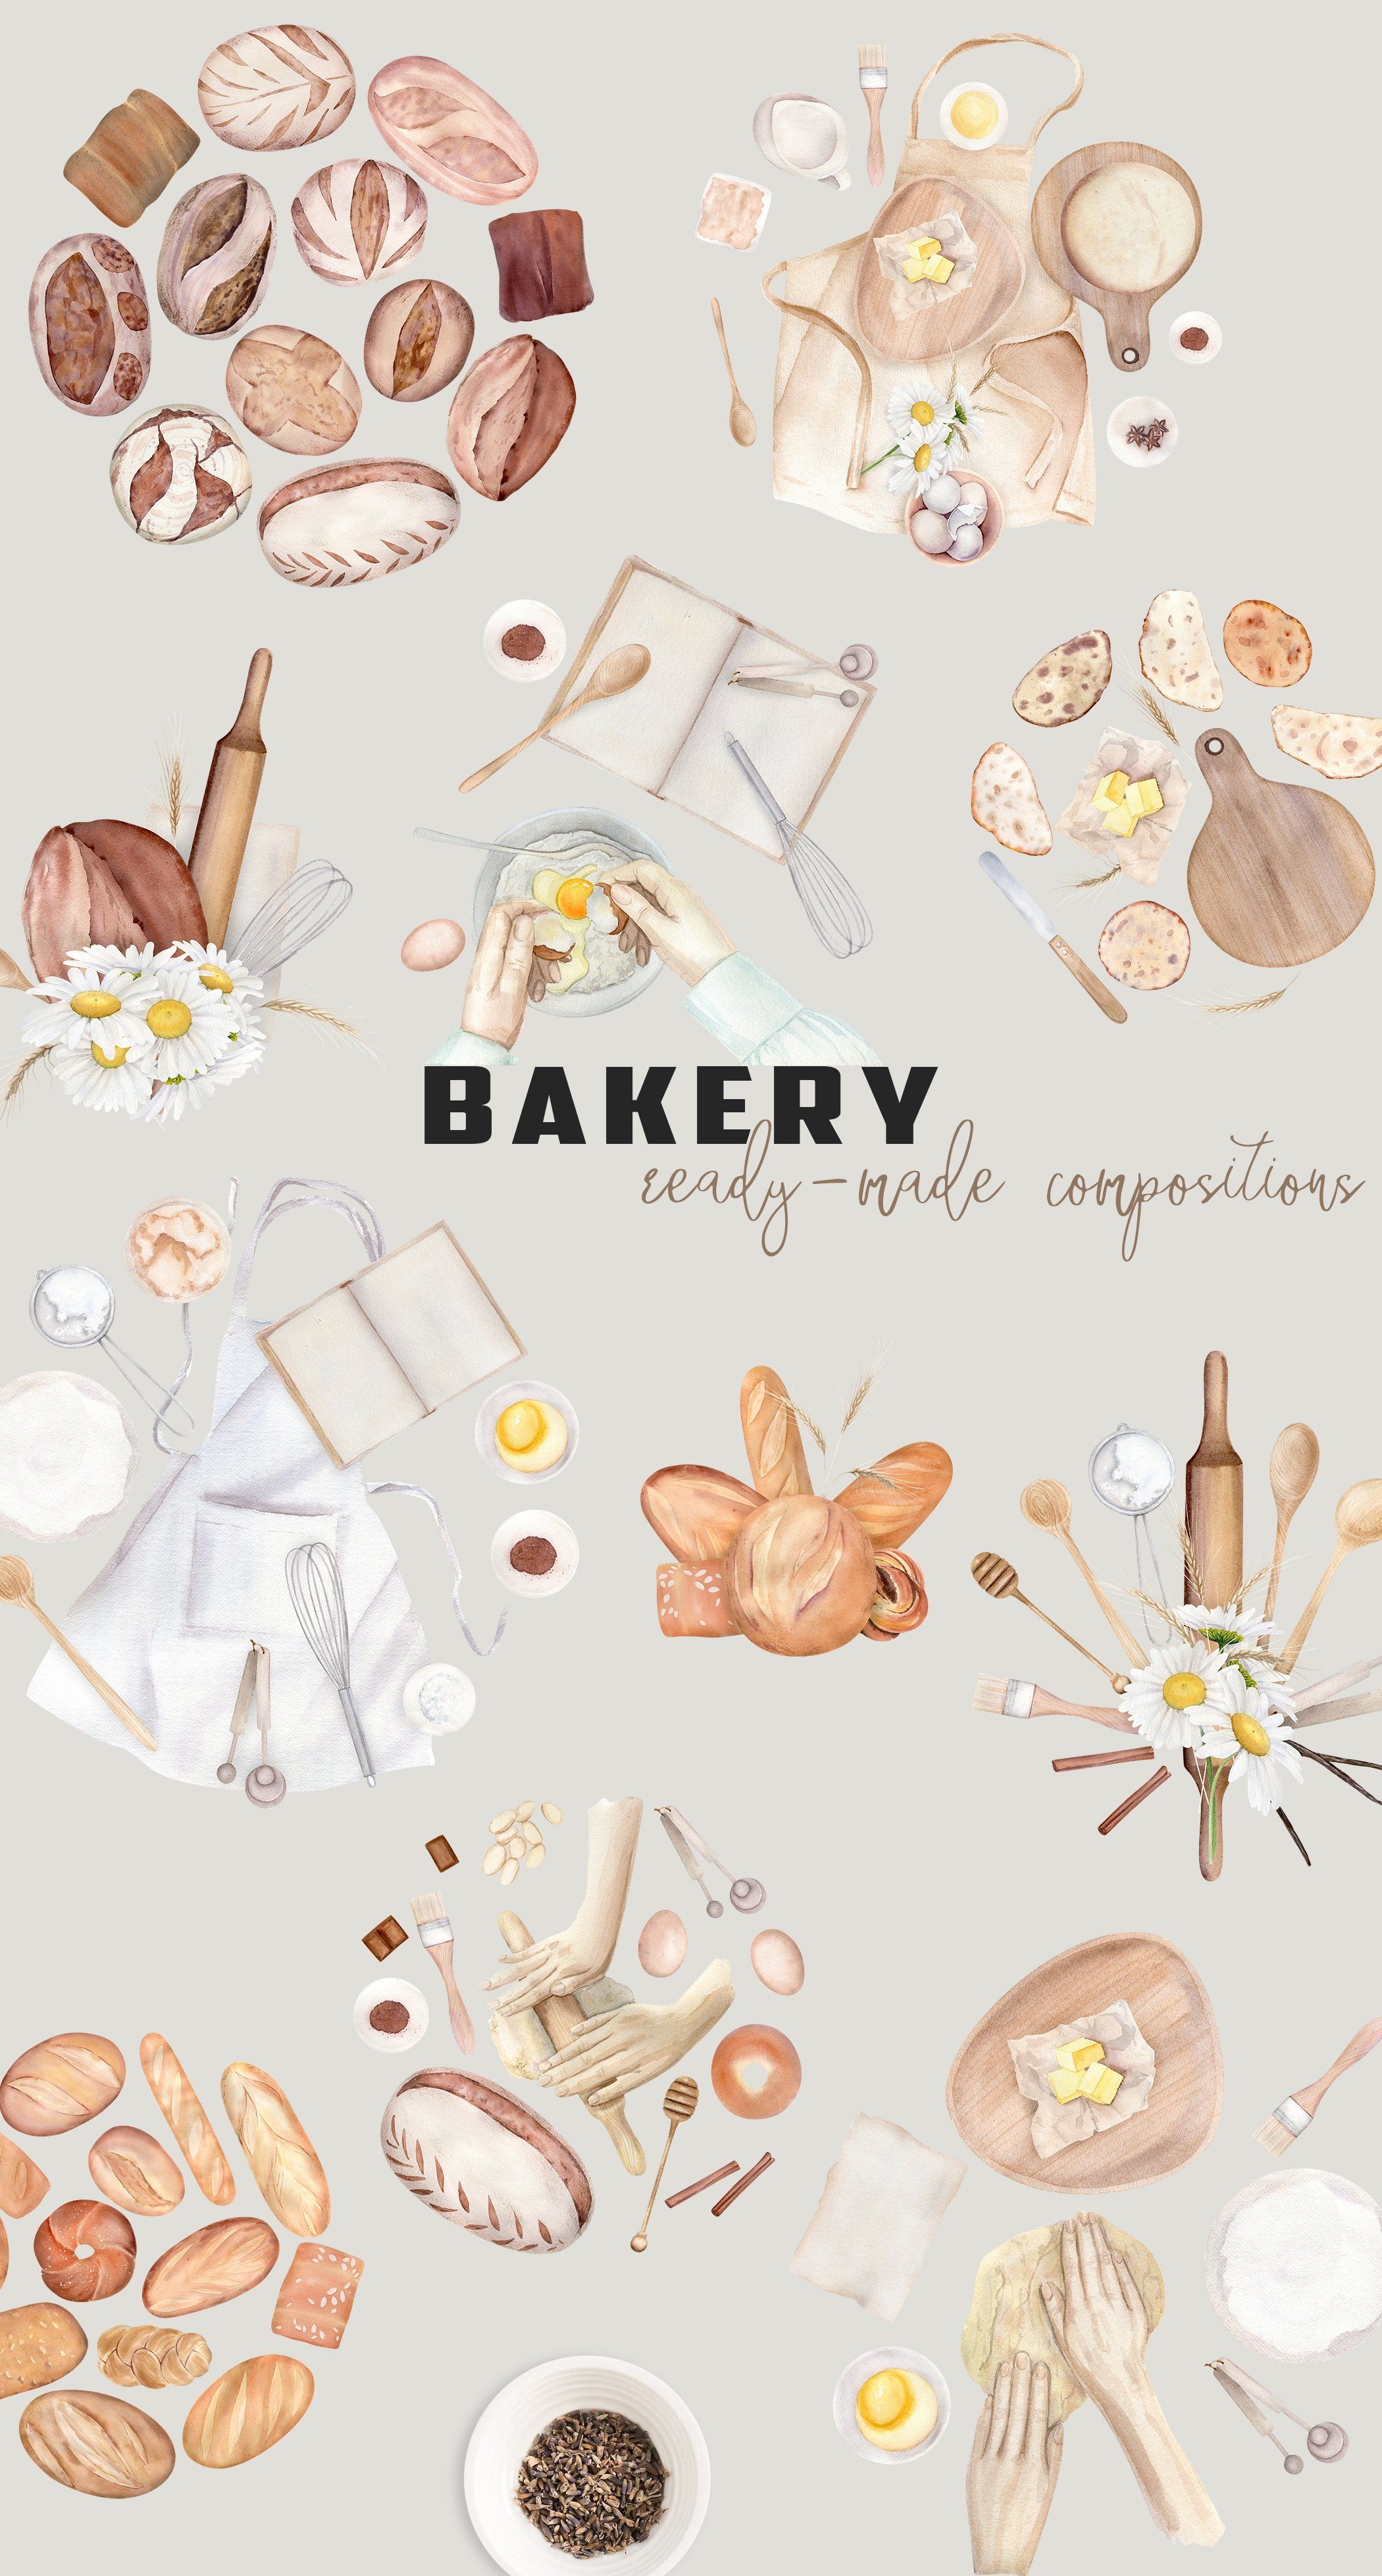 Watercolor bakery clipart, bakery clipart, bakery images, bakery illustrations, bakery graphics, bakery elements, bakery products, bakery clip art, bakery illustrations, bakery graphics, bakery elements, bakery products, bakery clip art, bakery illustrations, bakery graphics, bakery elements, bakery products, bakery clip art, bakery illustrations, bakery graphics, bakery elements, bakery products - Bakery